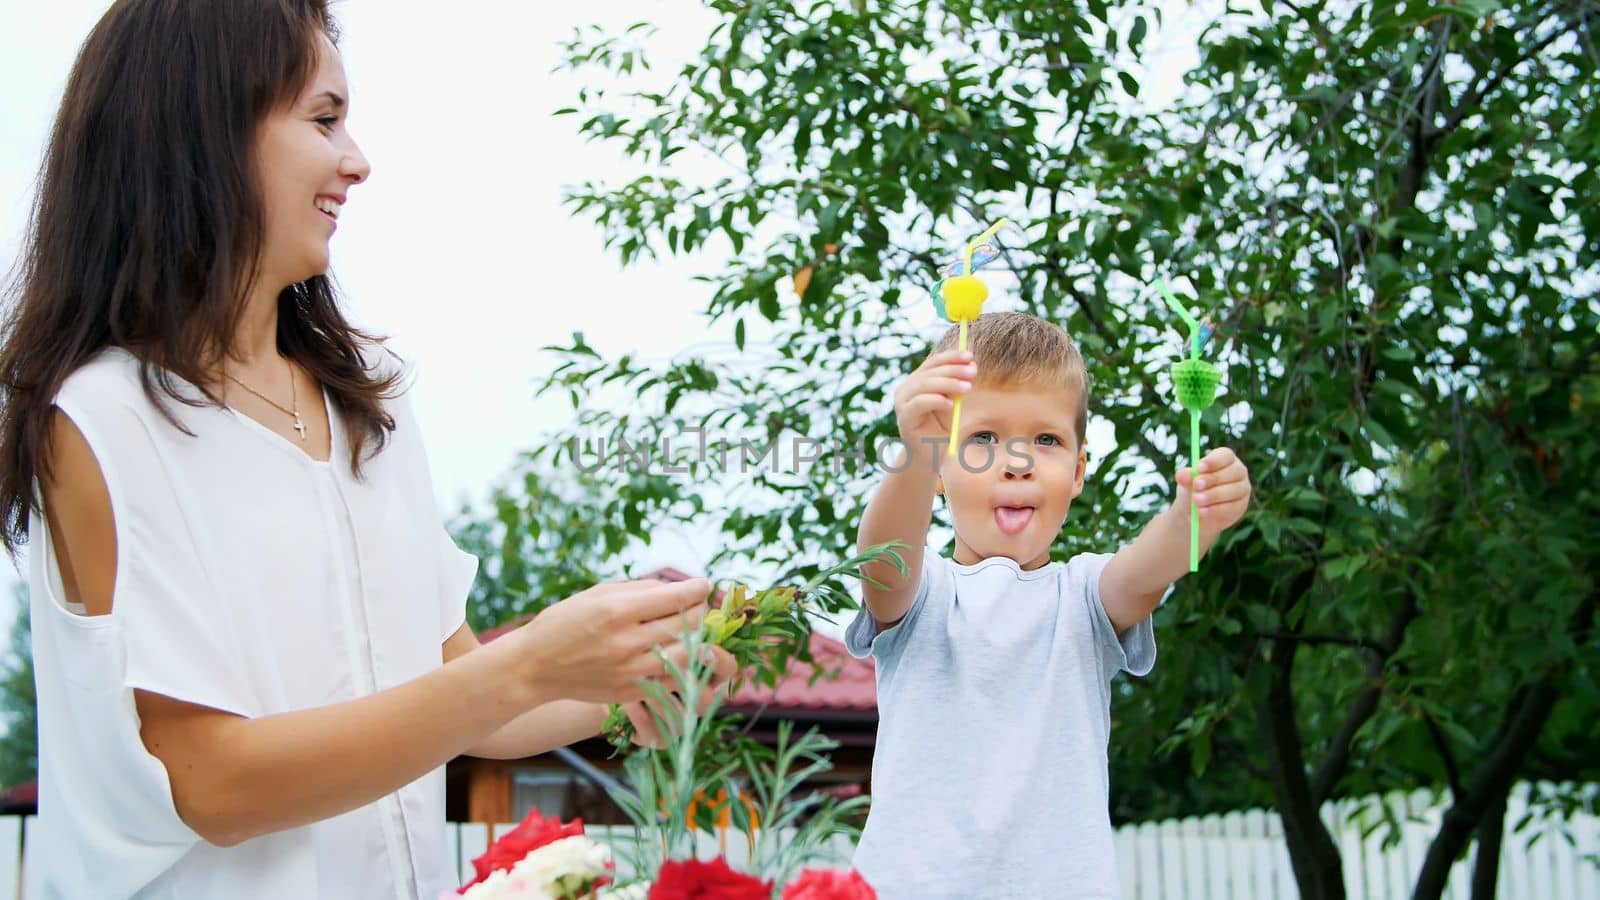 summer, in the garden, slow motion, Mom with a four-year-old son decorate the straw for juice. The boy likes it very much, he rejoices, has fun, shows his tongue. High quality photo